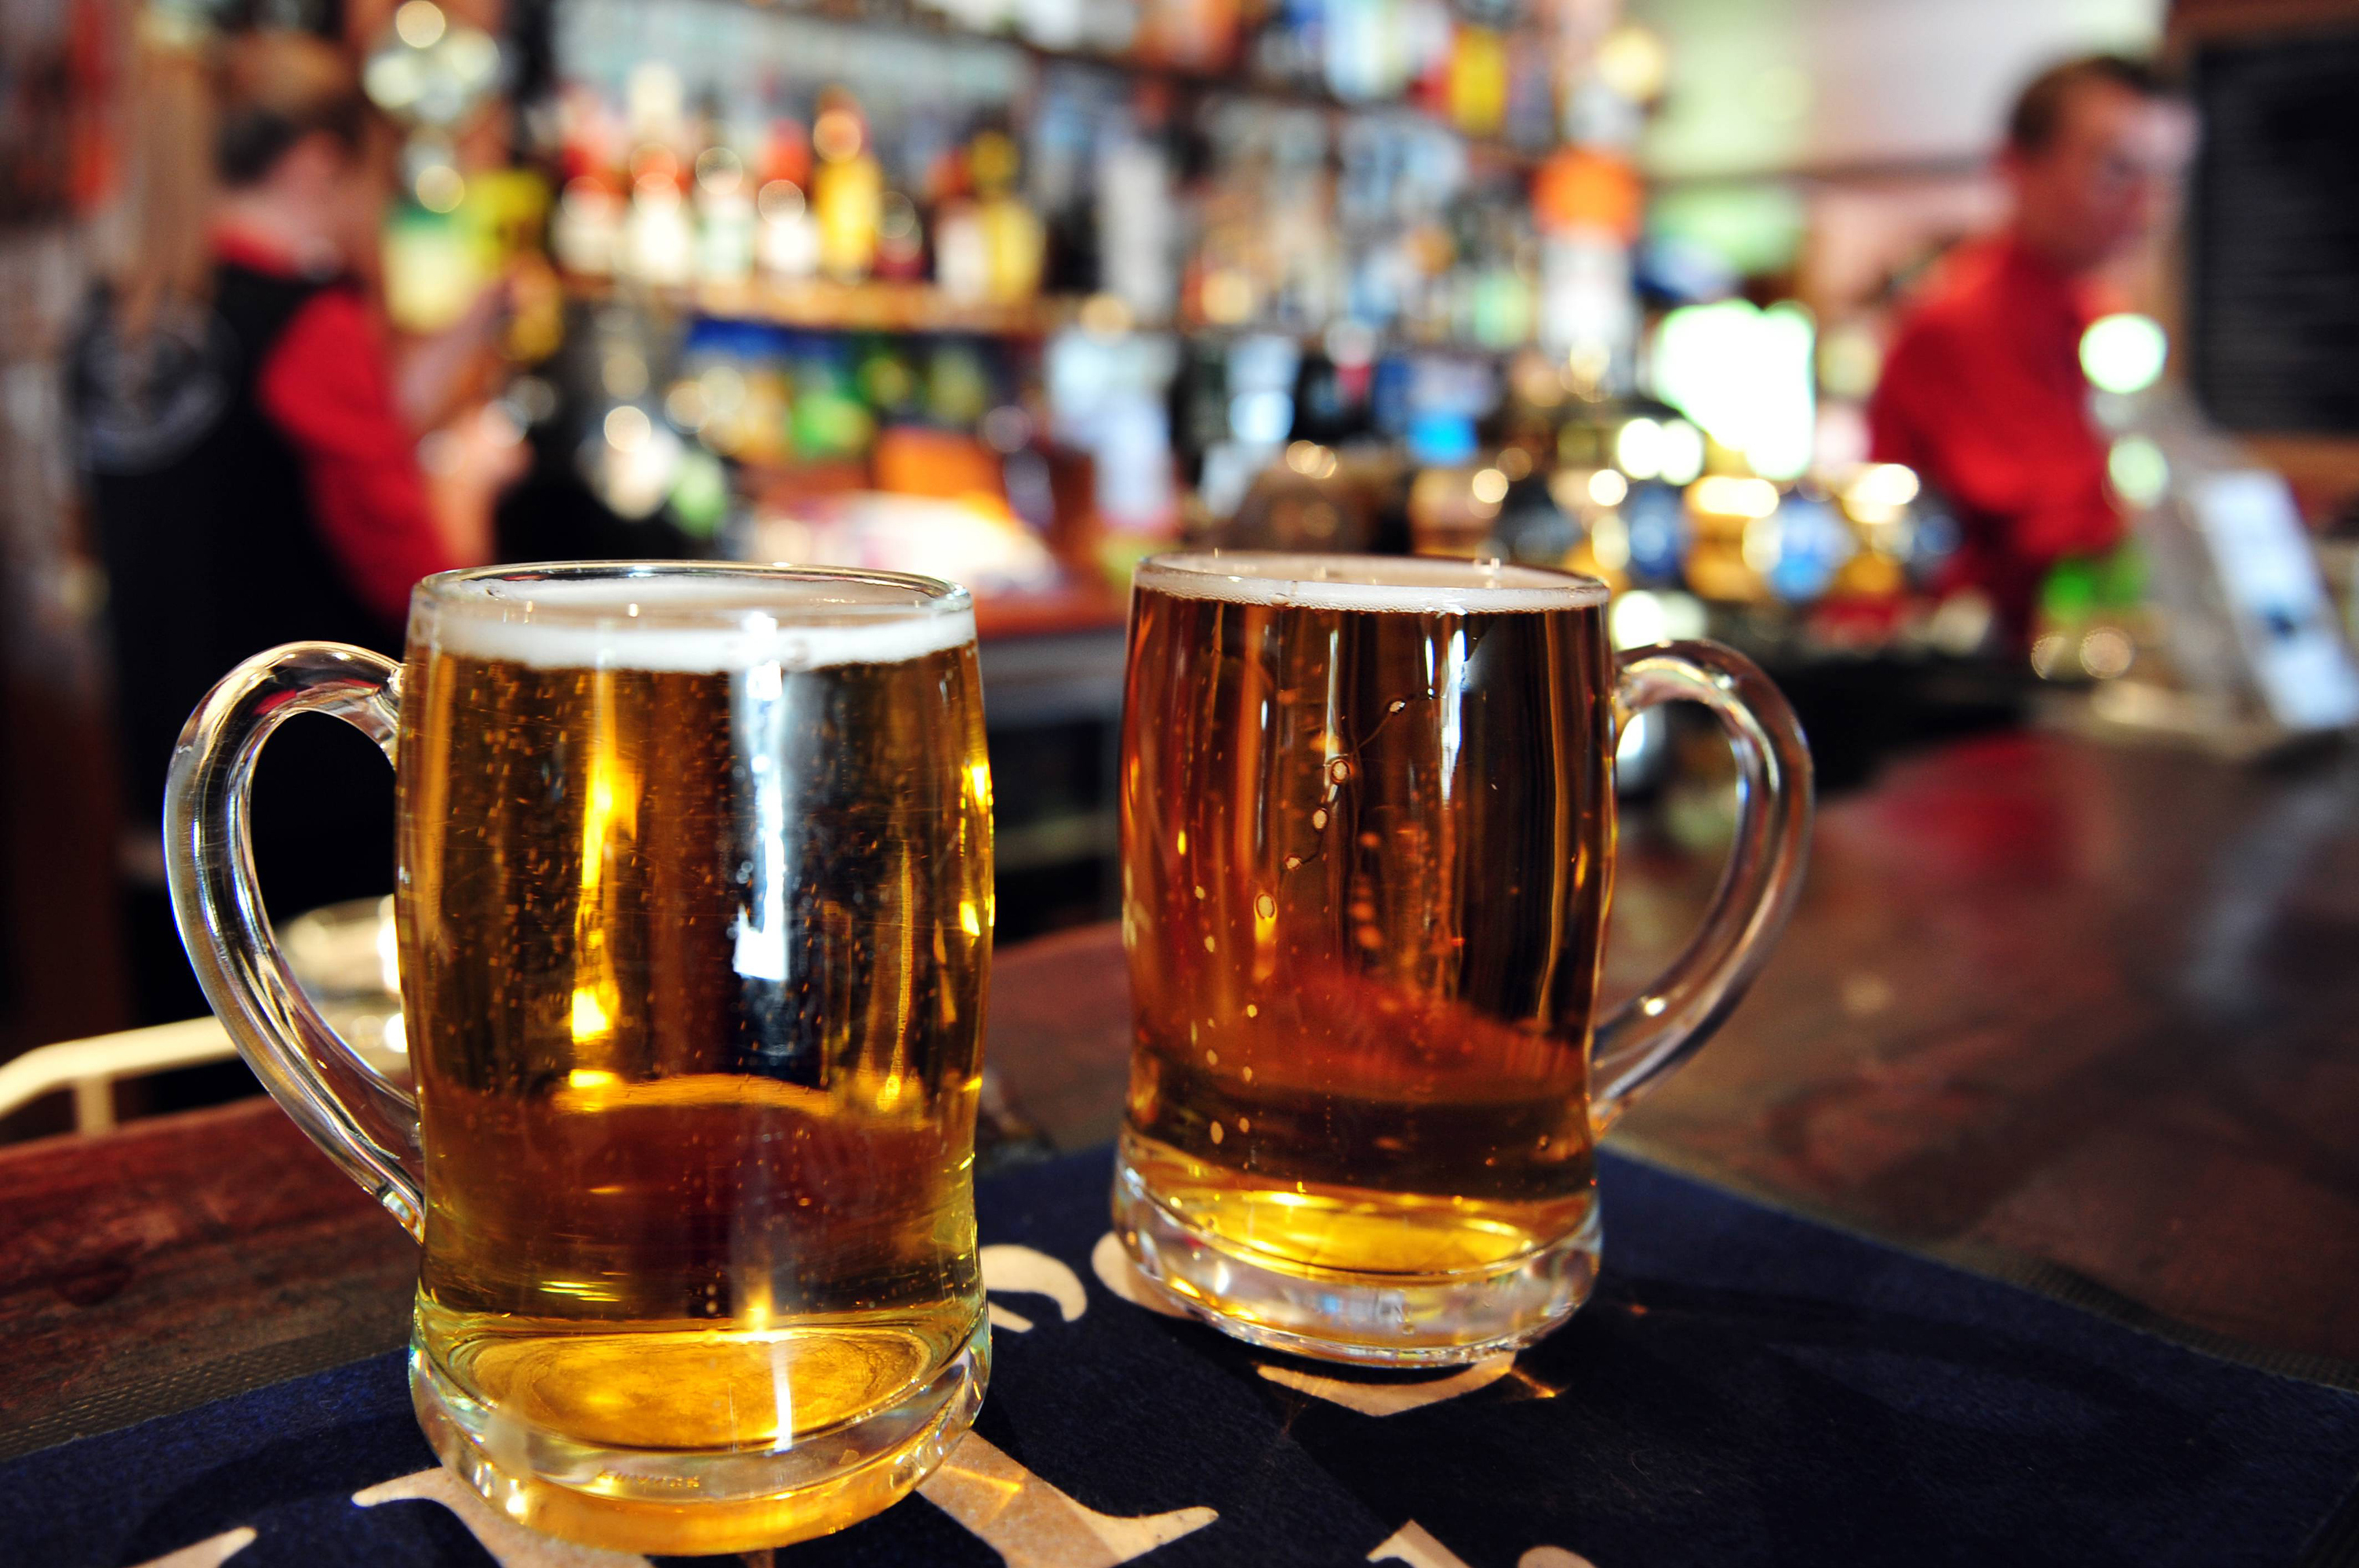 two-cups-of-beer-in-bar - Krav Maga NYC